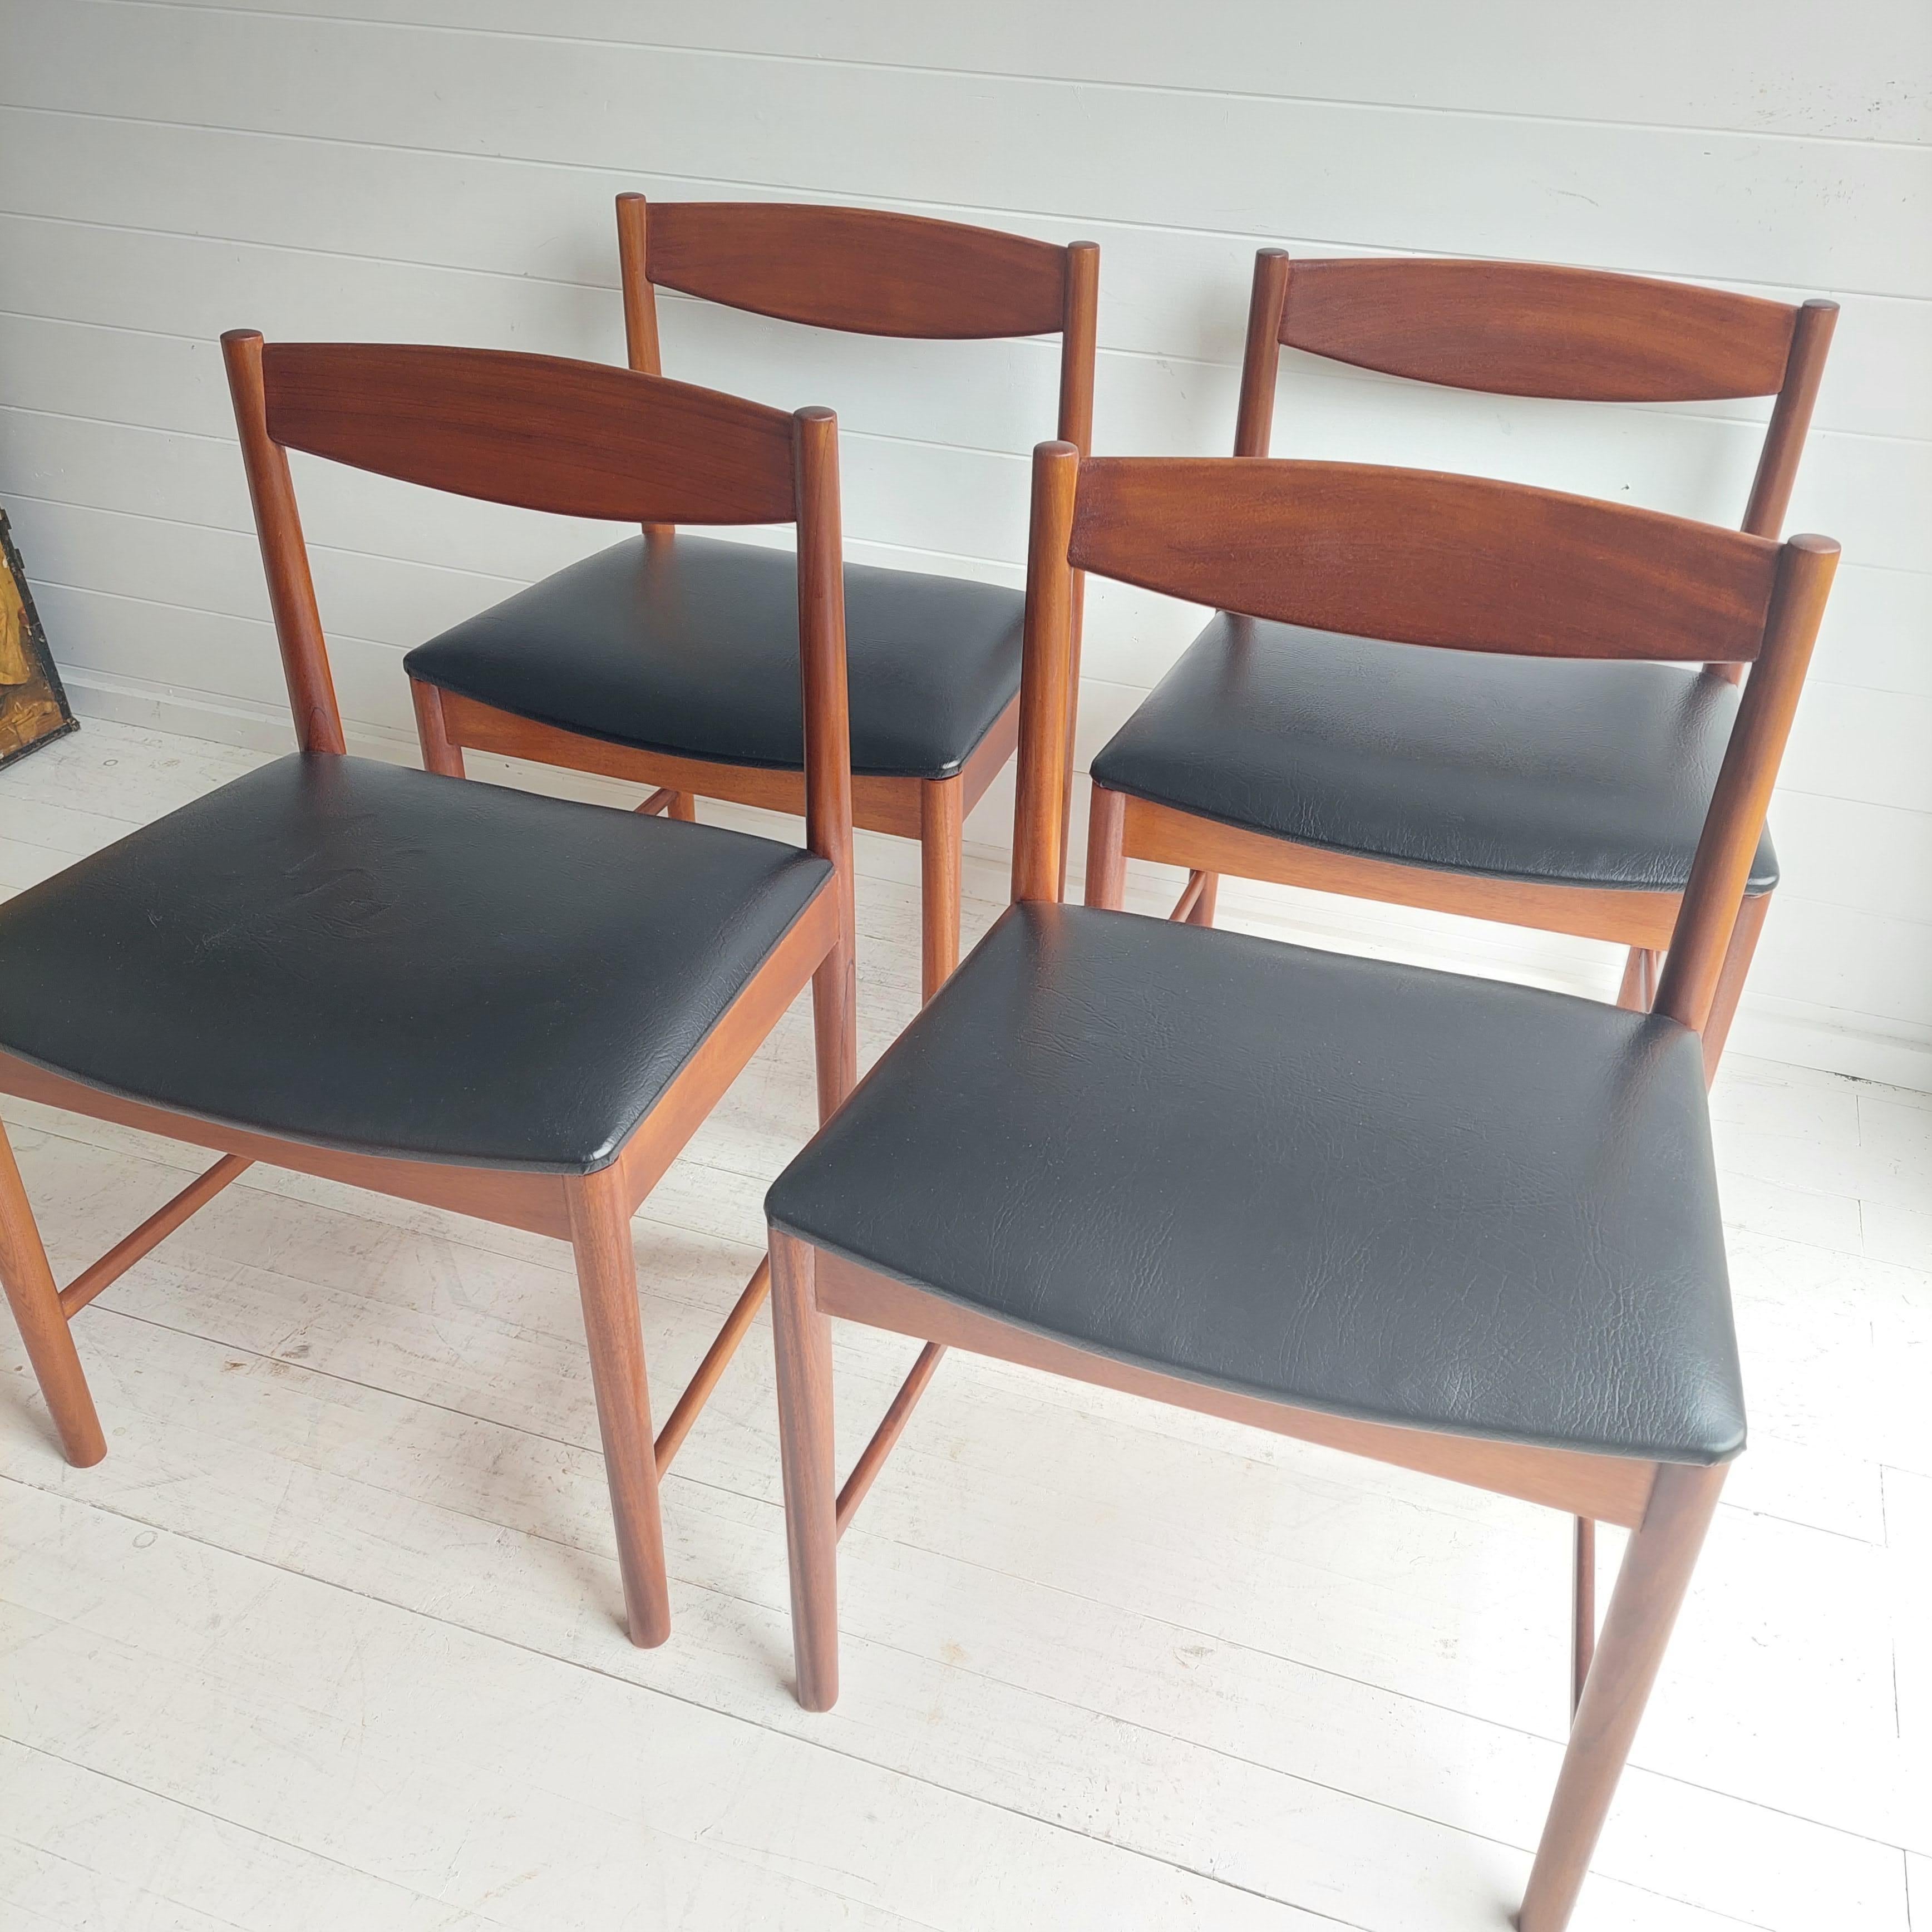 20th Century Mid Century Teak Dining Chairs By McIntosh 1960s Set Of 4